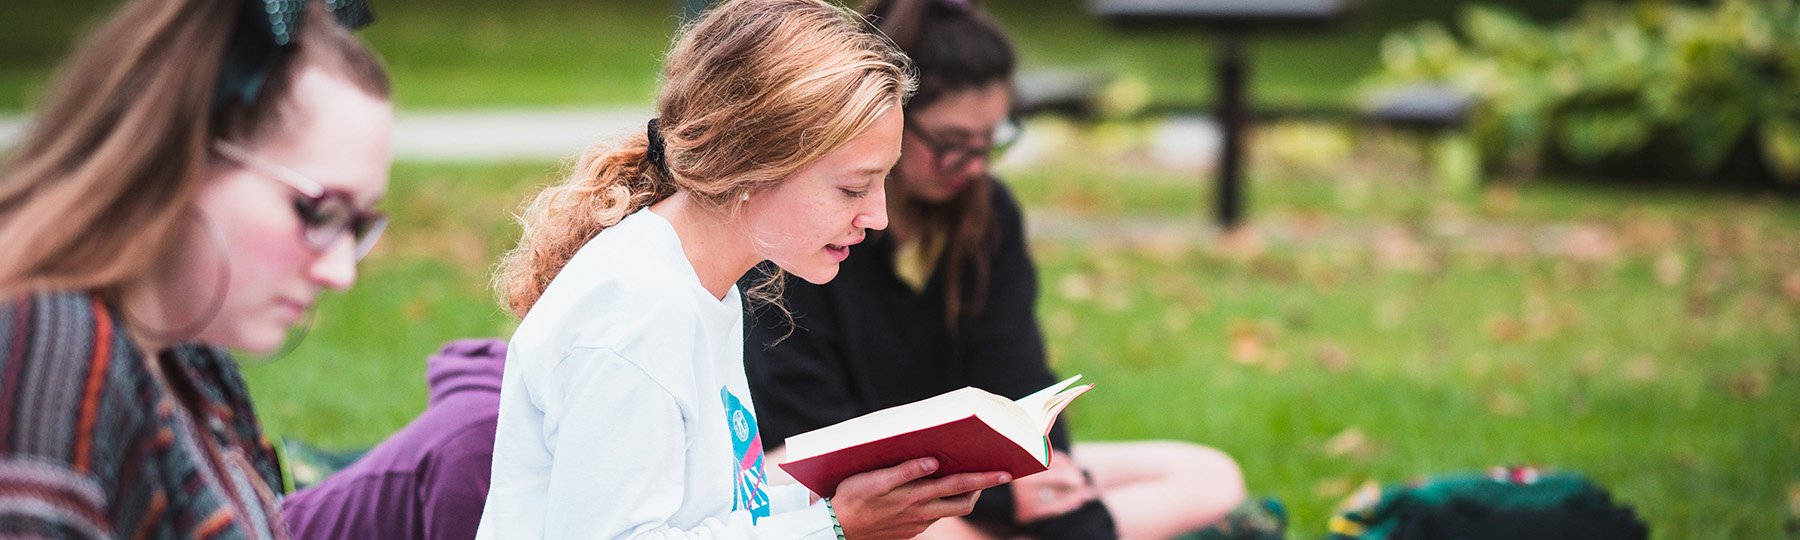 Student seated on the grass holds a book in her hands and reads while other students sit nearby to listen.